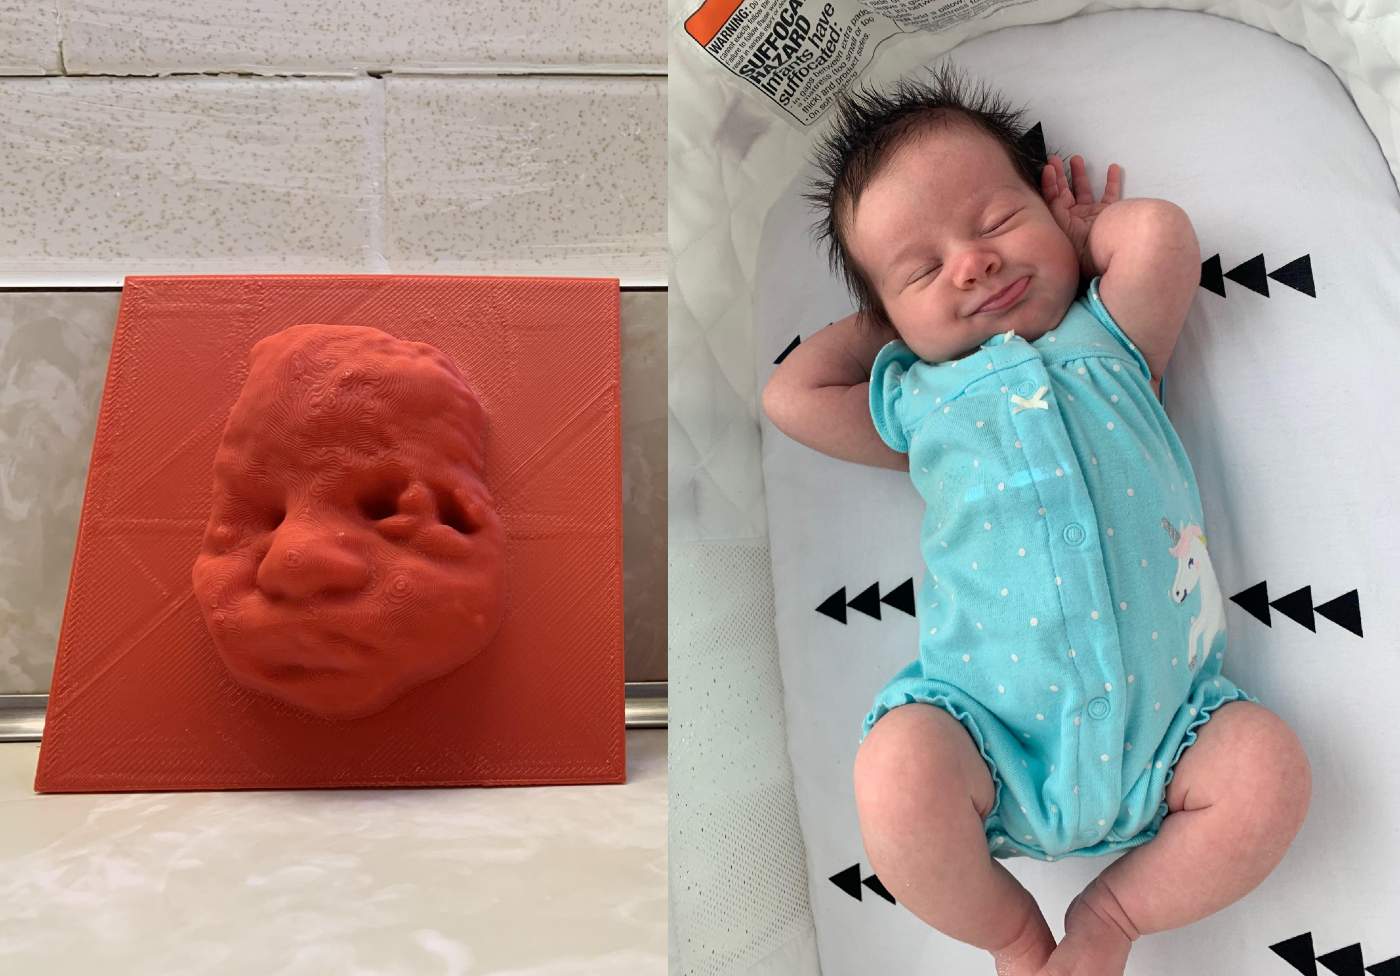 Blind Mom Got To 'See' Her Adorable Unborn Baby Thanks to a 3D-Printed Ultrasound